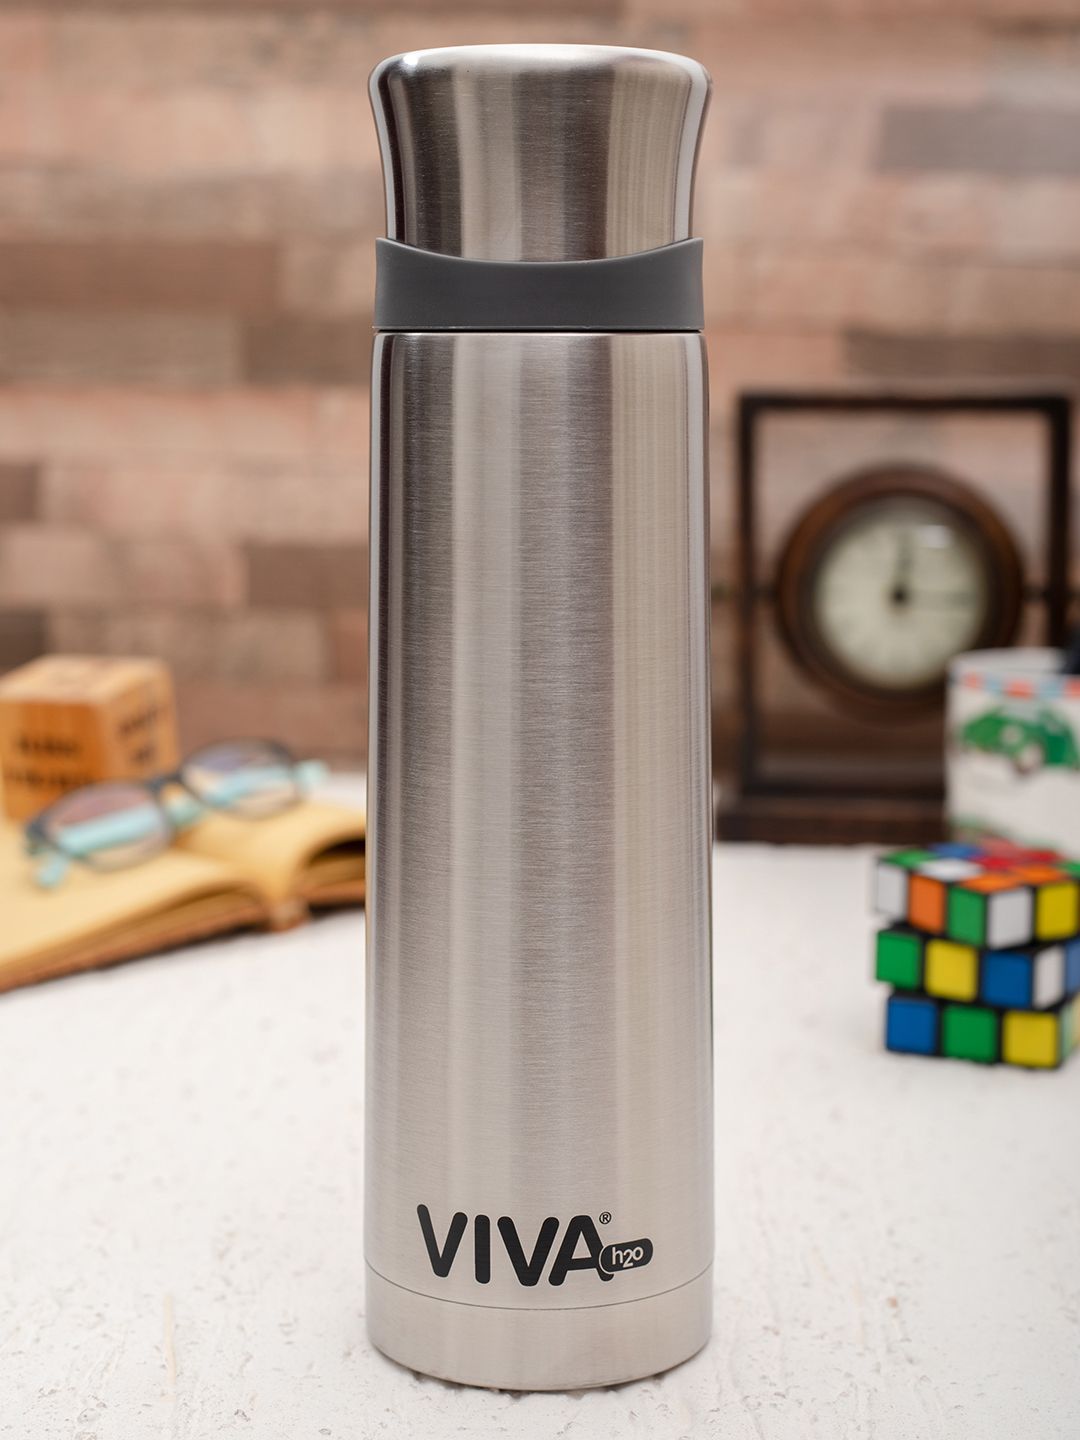 VIVA h2o Unisex Silver-Toned Solid Double Wall Stainless Steel Vaccum Insulated Water Bottle Price in India